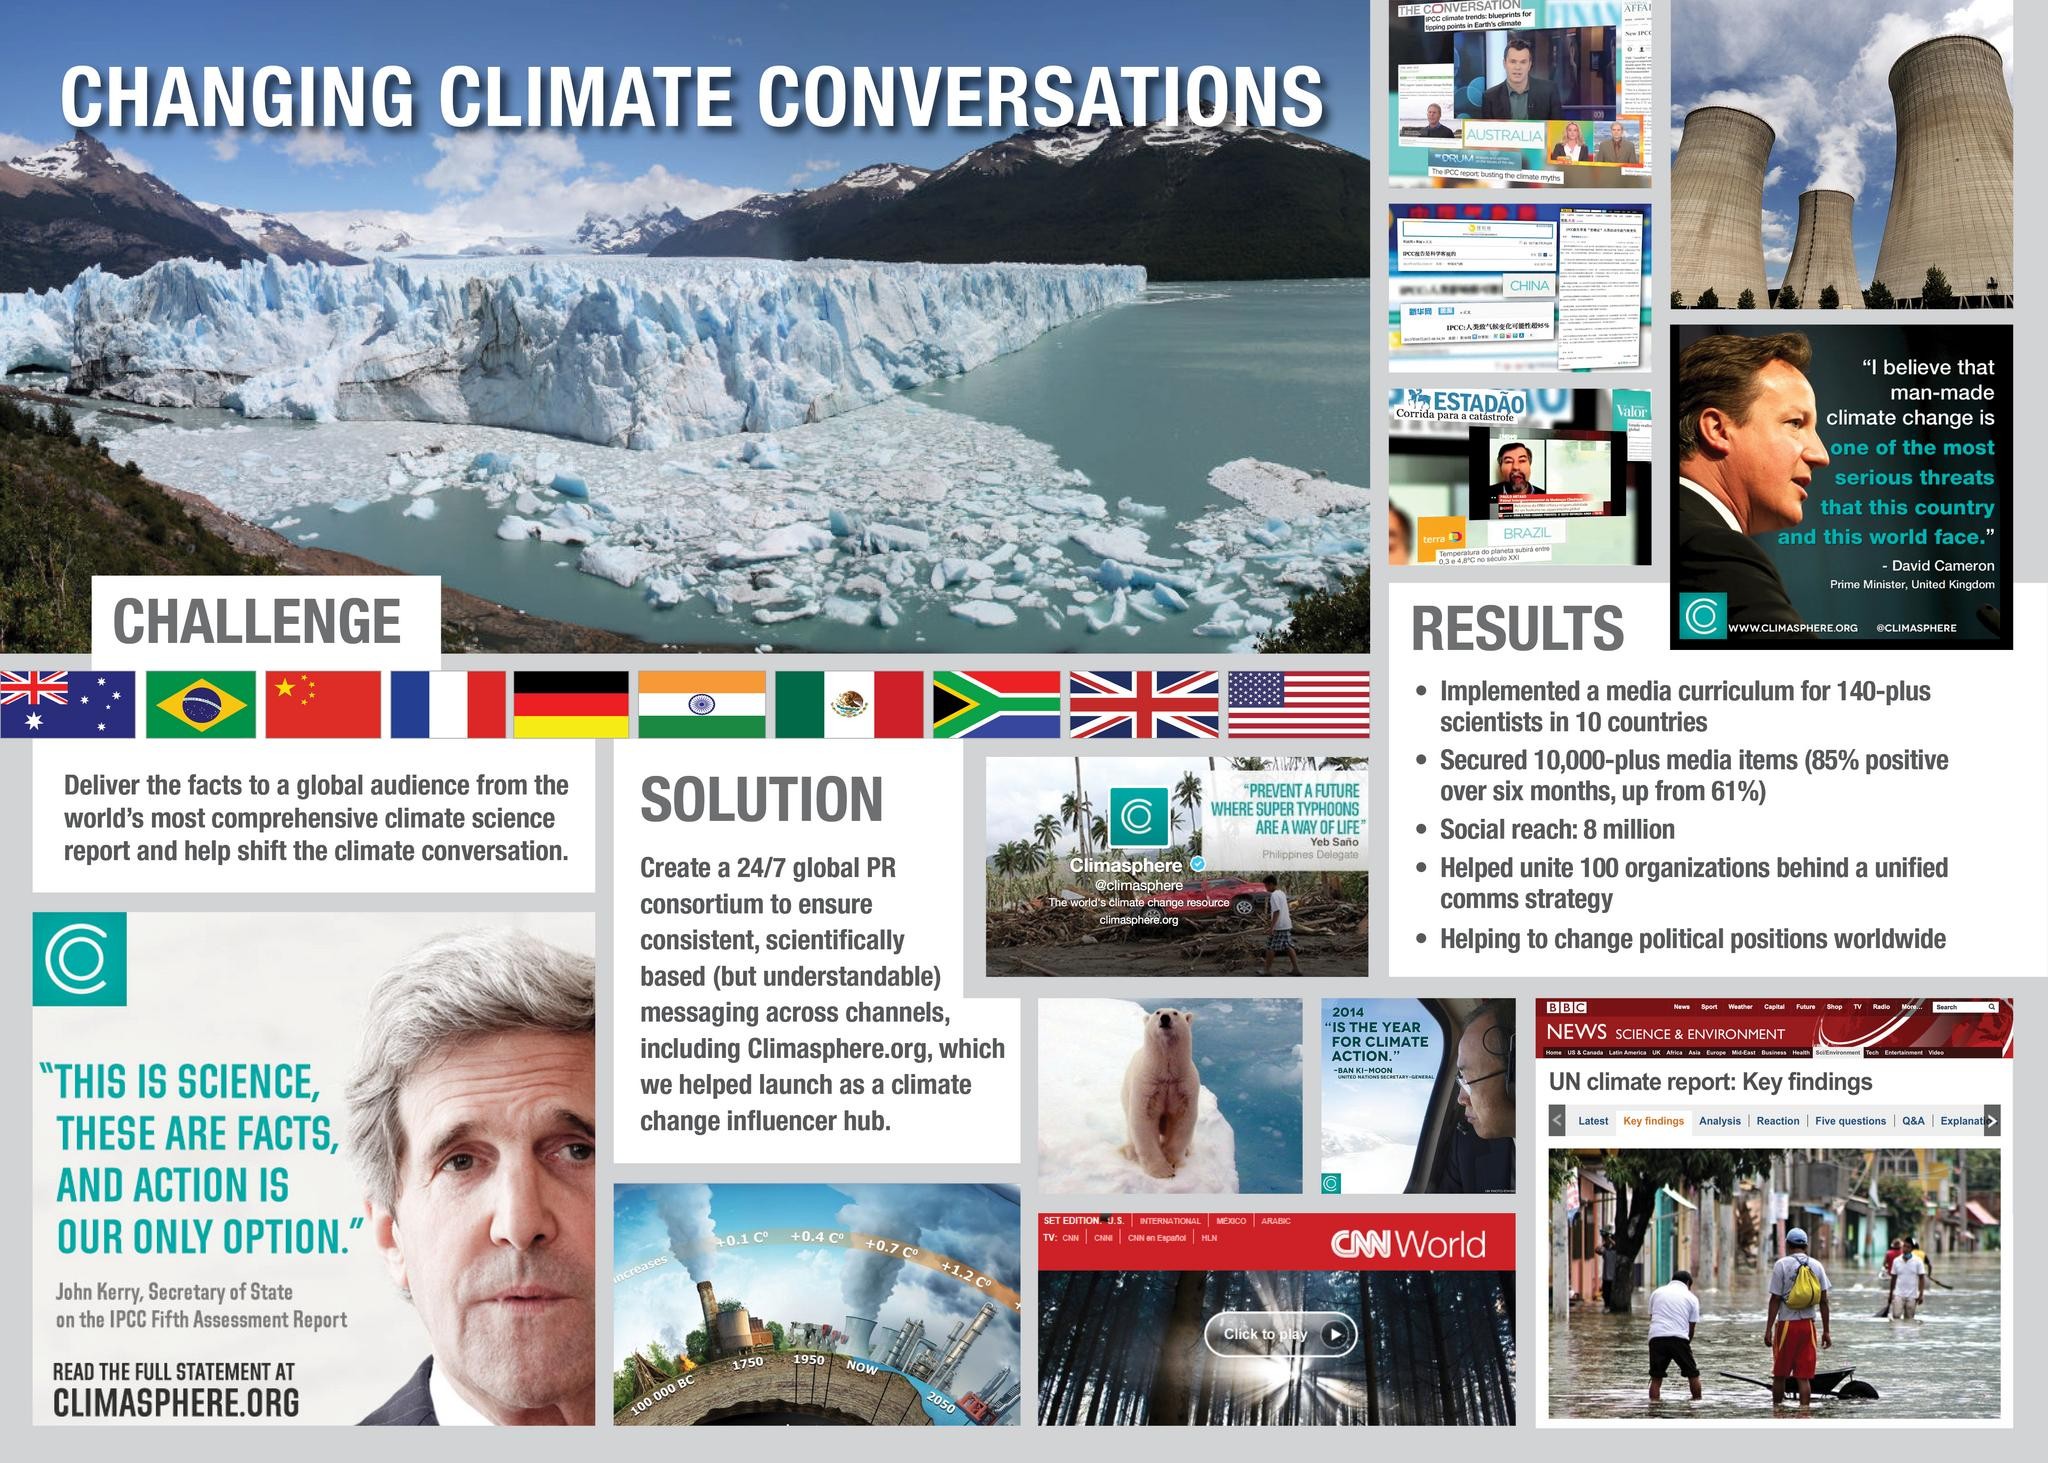 CHANGING CLIMATE CONVERSATIONS